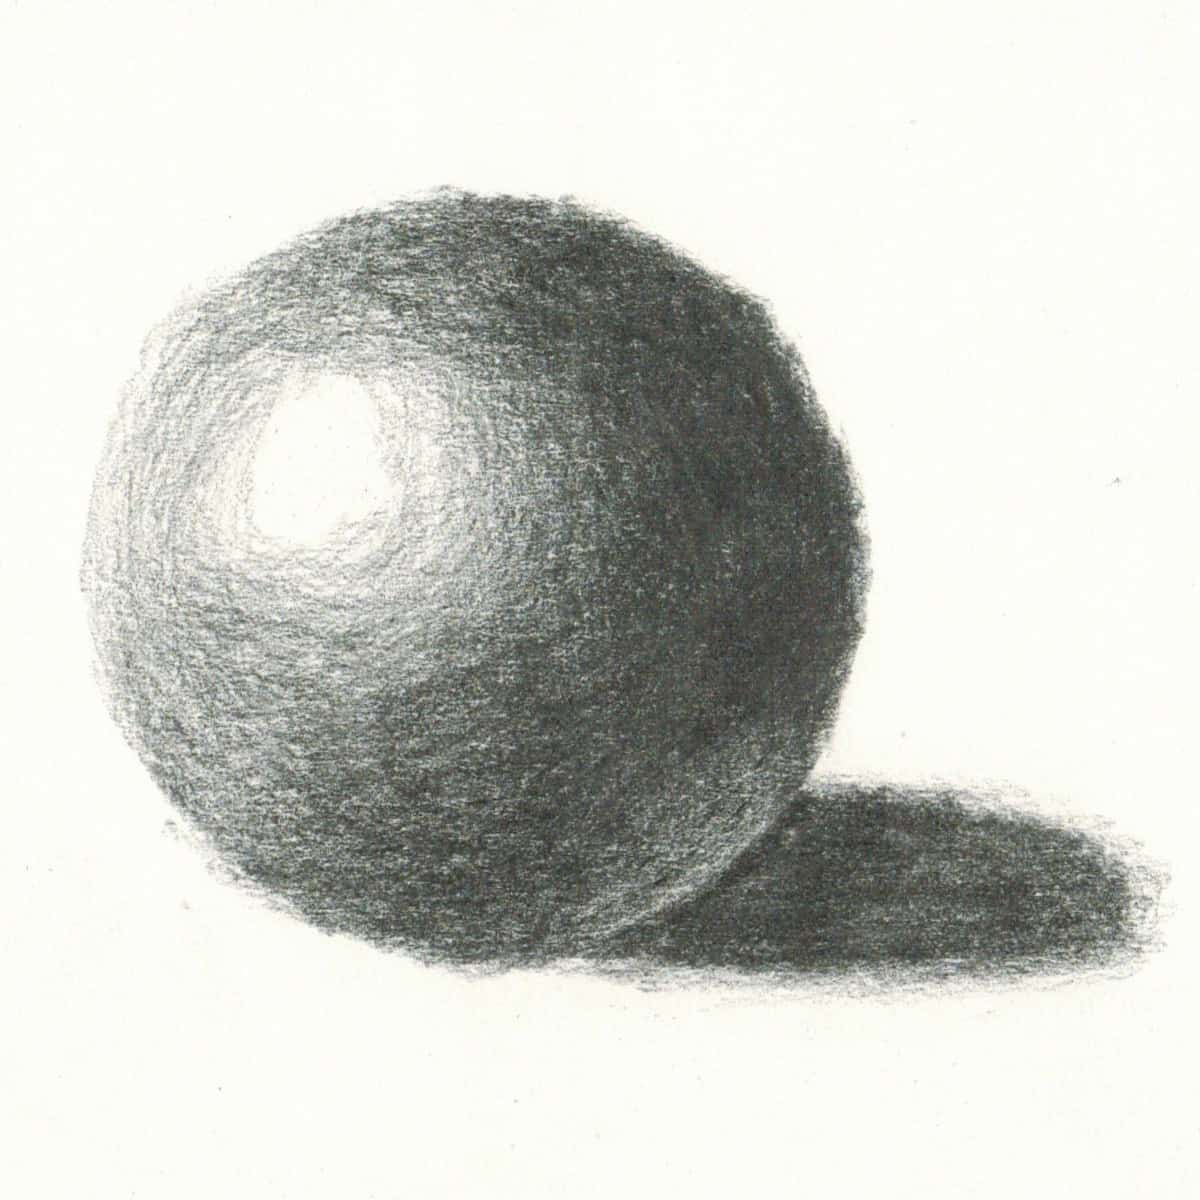 Pencil Drawing of a Sphere